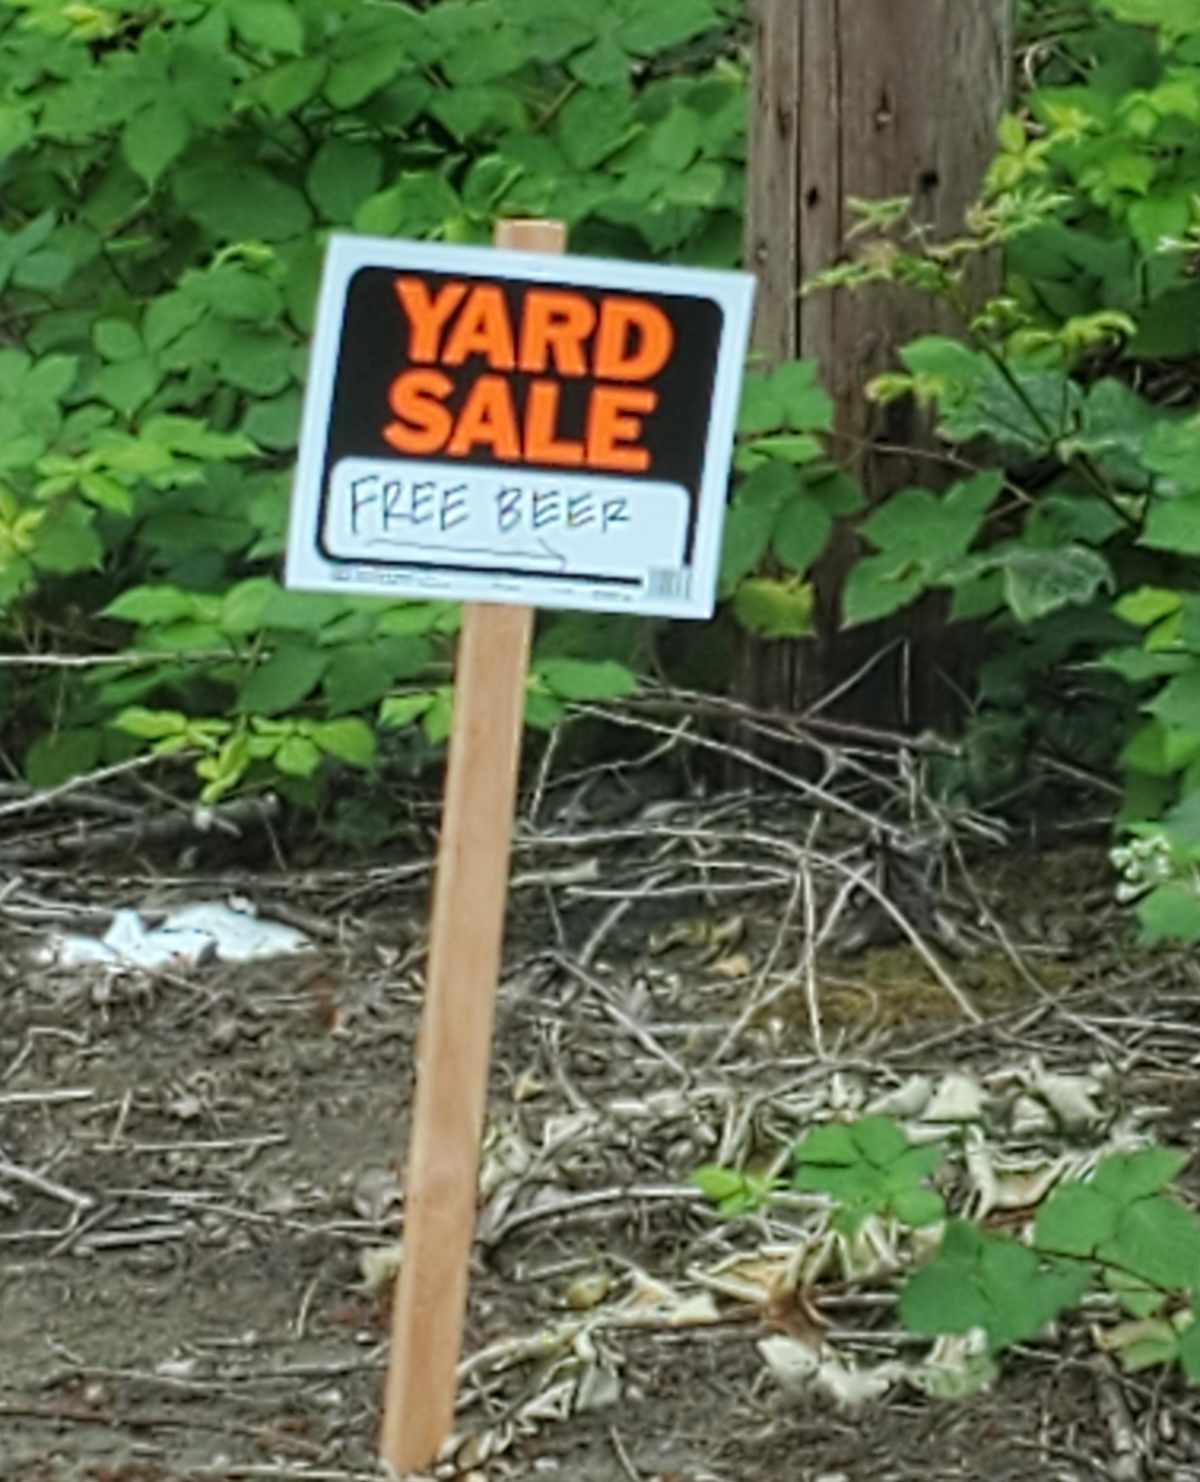 That's one way to get people to your yard sale